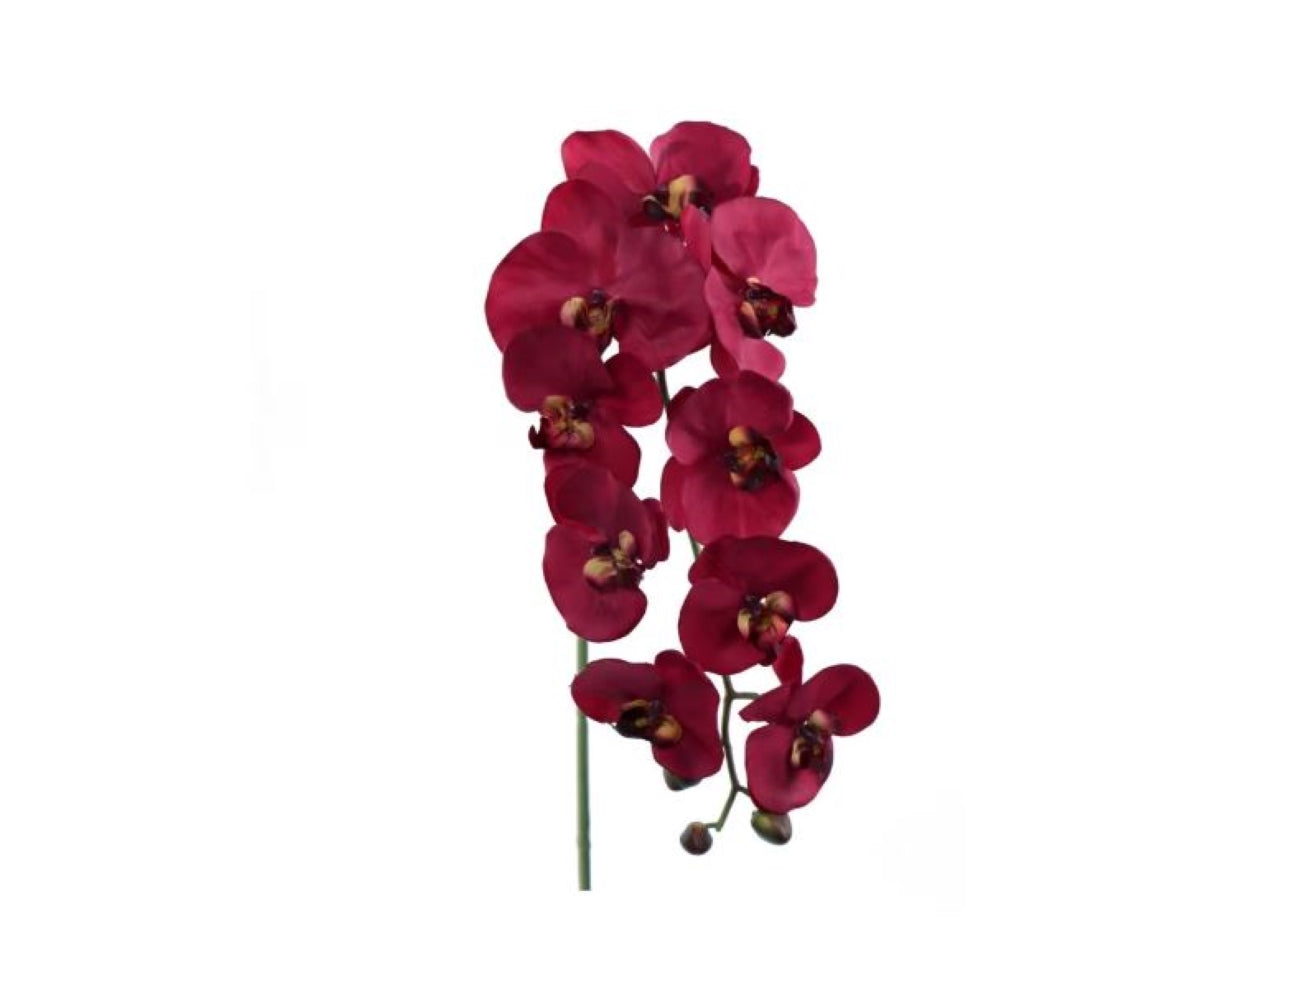 Luxurious 34" Burgundy Artificial Phalaenopsis Orchid - Silk Flower Decor for Elegant Home & Office Styling, Weddings - Lifelike Faux Floral Accent